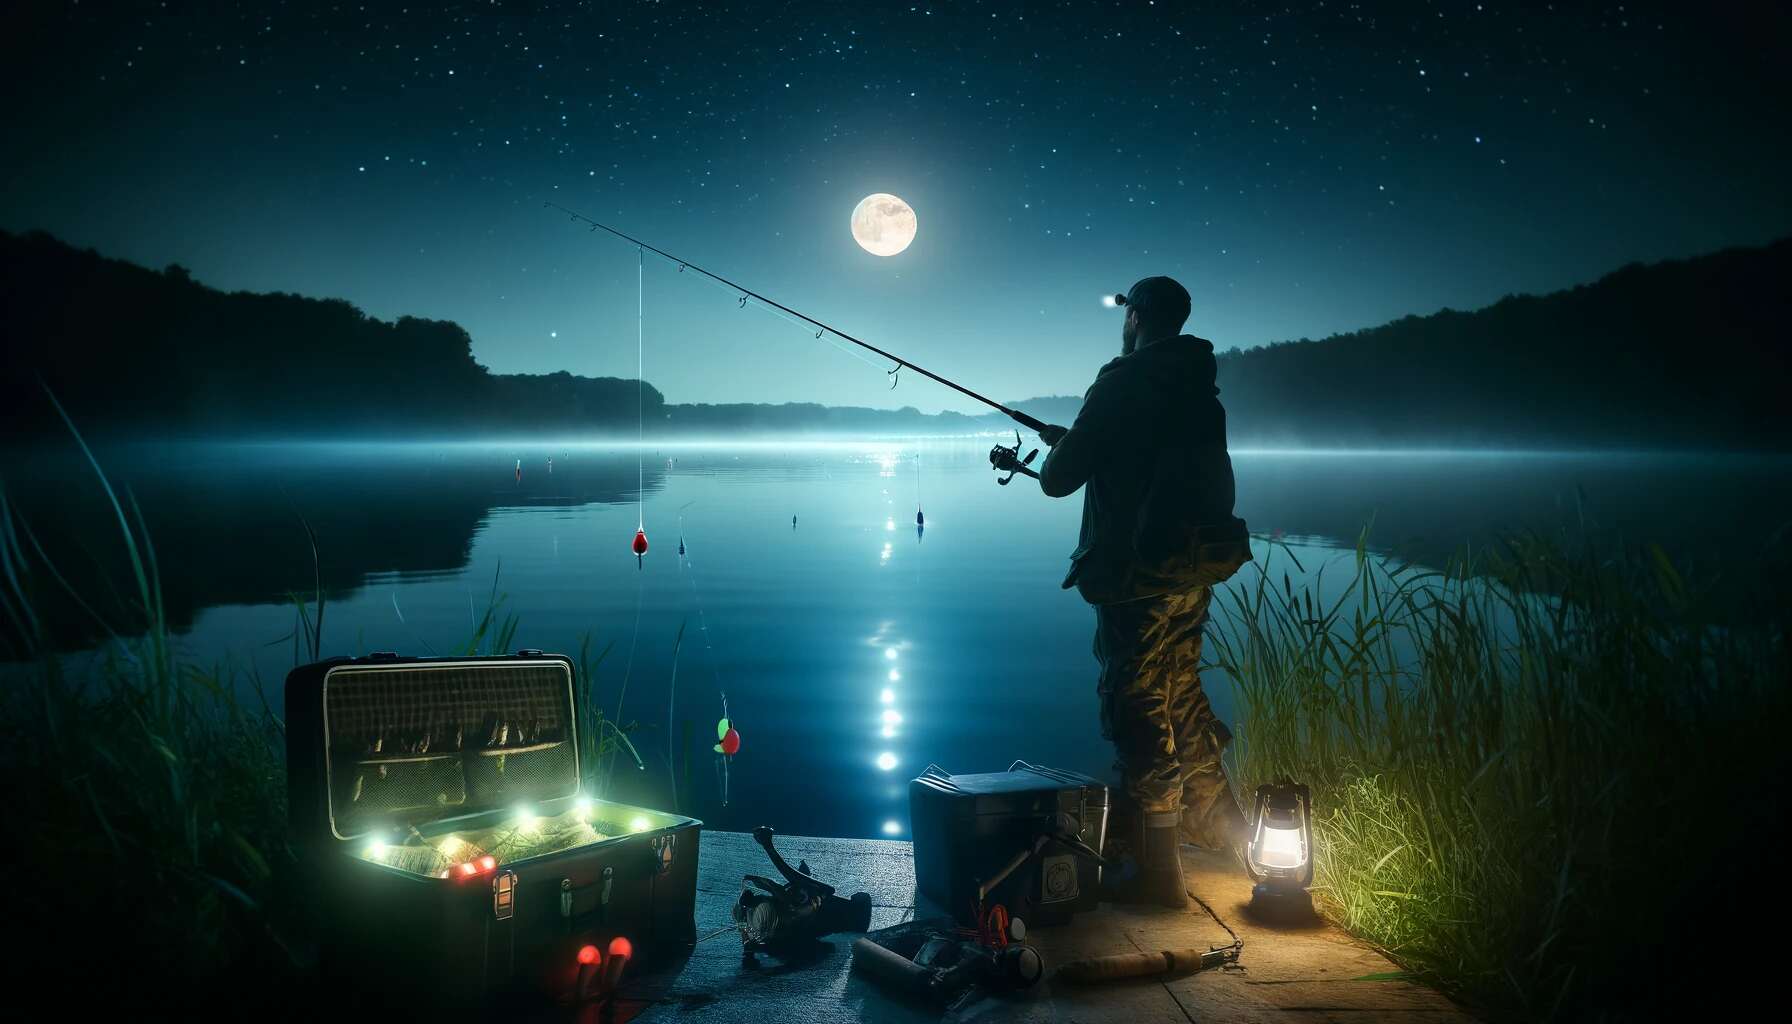 Angler night fishing on a quiet lake with glow-in-the-dark bobbers and a headlamp illuminating the area. The full moon and stars are visible, reflecting on the calm water. Fishing gear, including rods and tackle boxes, is nearby, creating a peaceful and inviting atmosphere